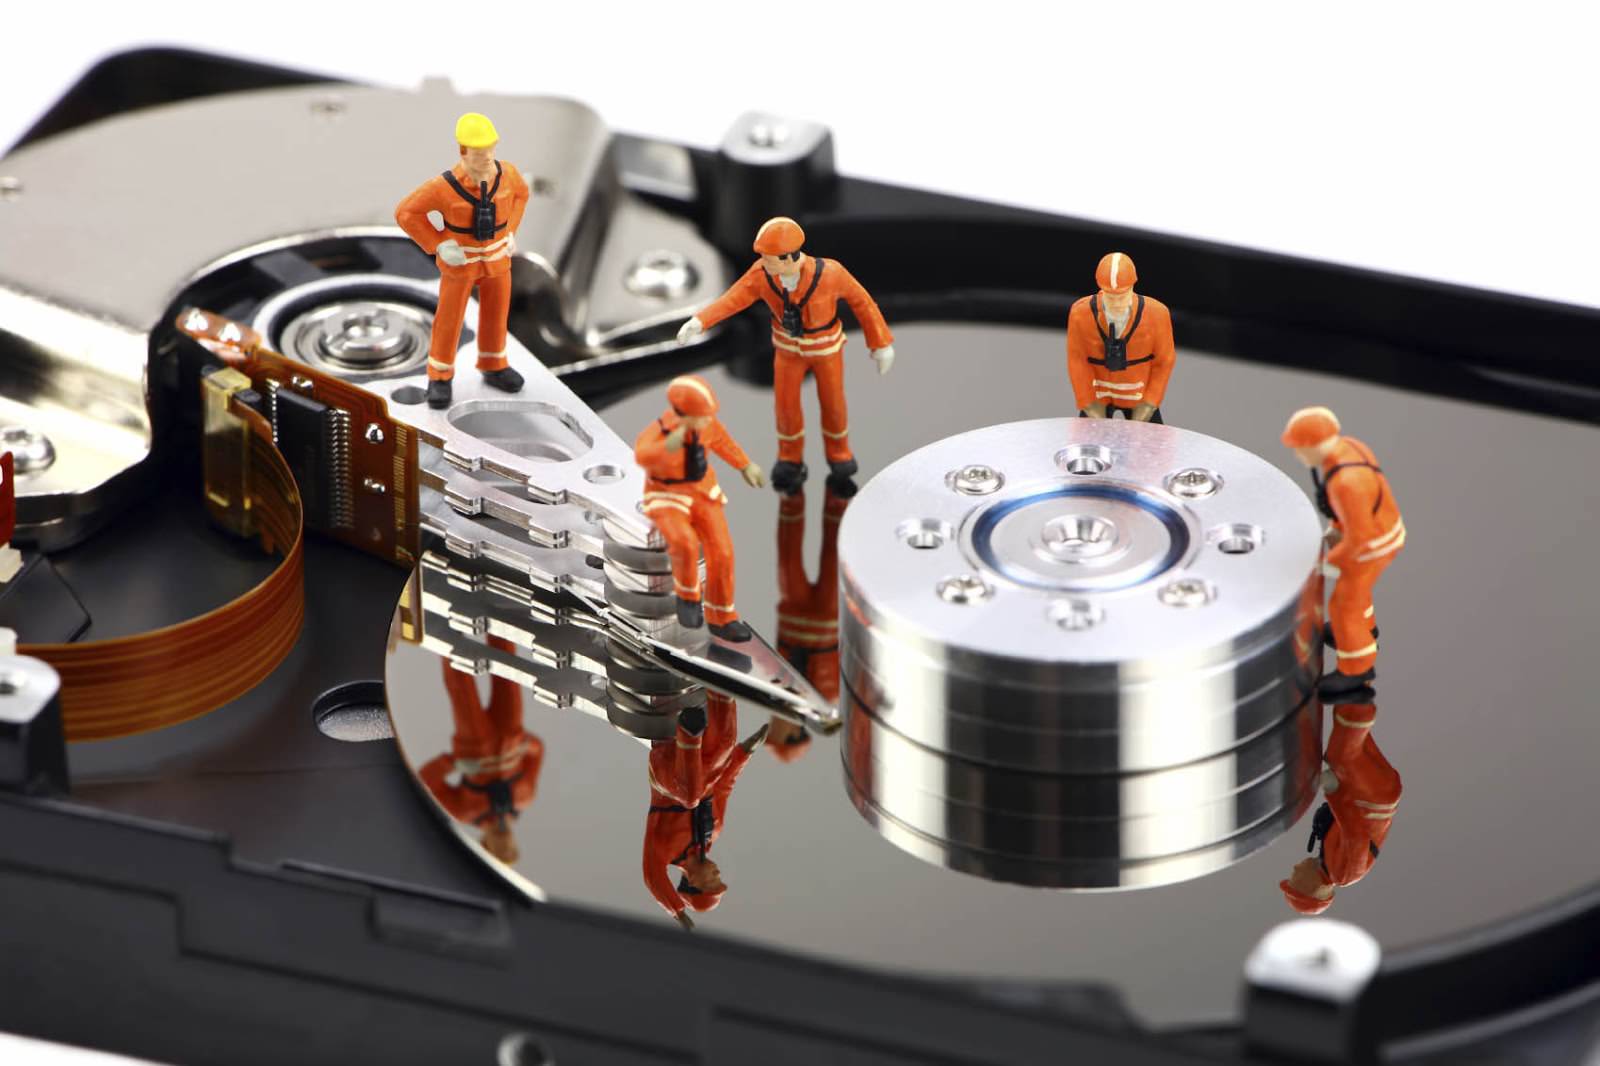 The Challenge of Black Box Data Recovery